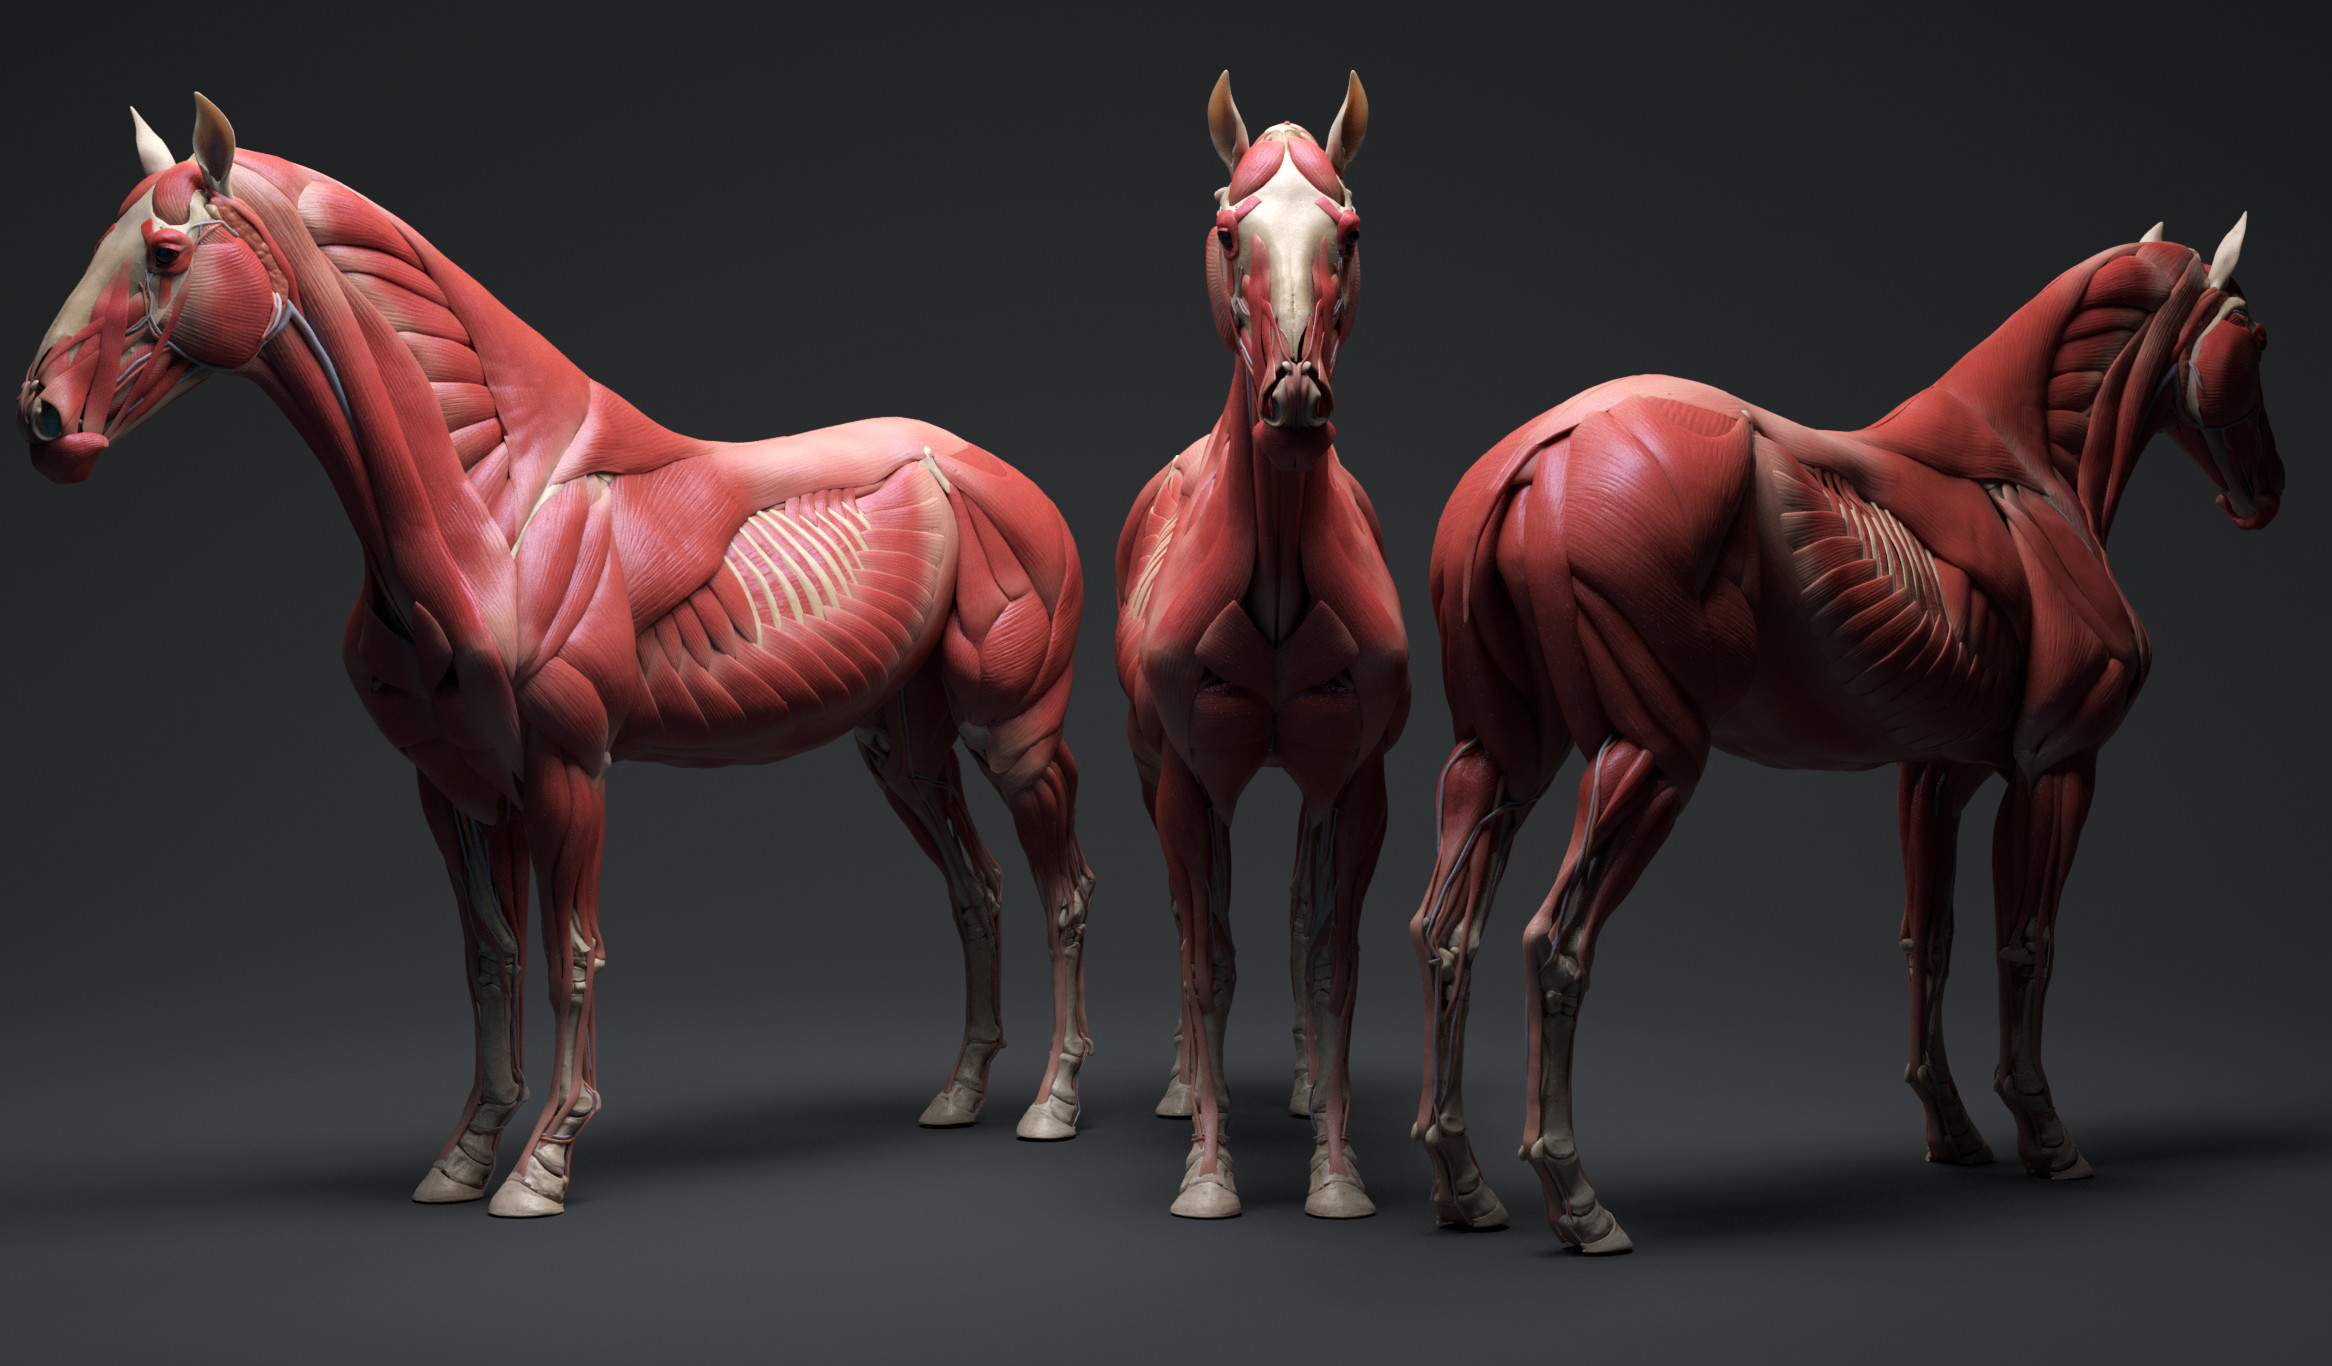 Horse ecorche, now available on 3dscan store. Follow the link: https://www.3dscanstore.com/ecorche-3d-models/horse-ecorche-3d-model 